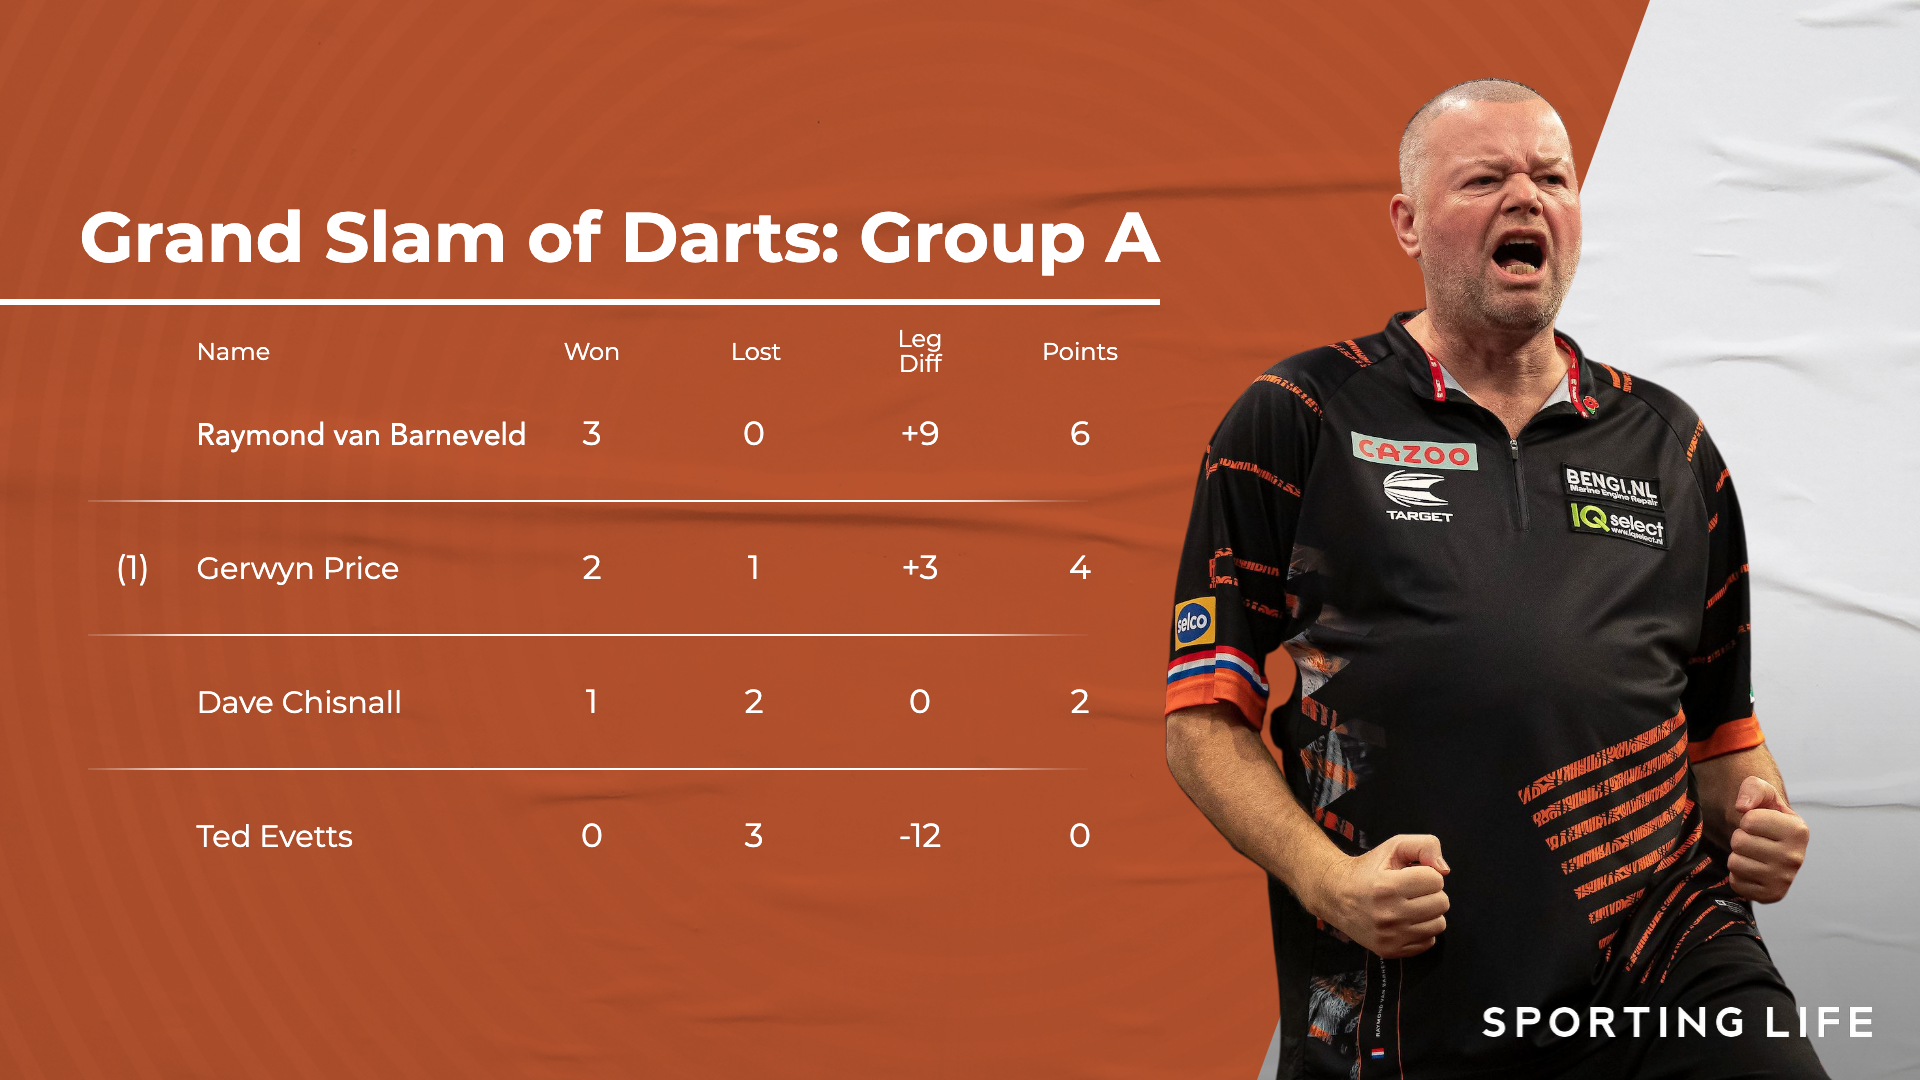 Grand Slam of Darts 2022 Group draw, tables, schedule, results, live Sky Sports TV coverage details and betting odds